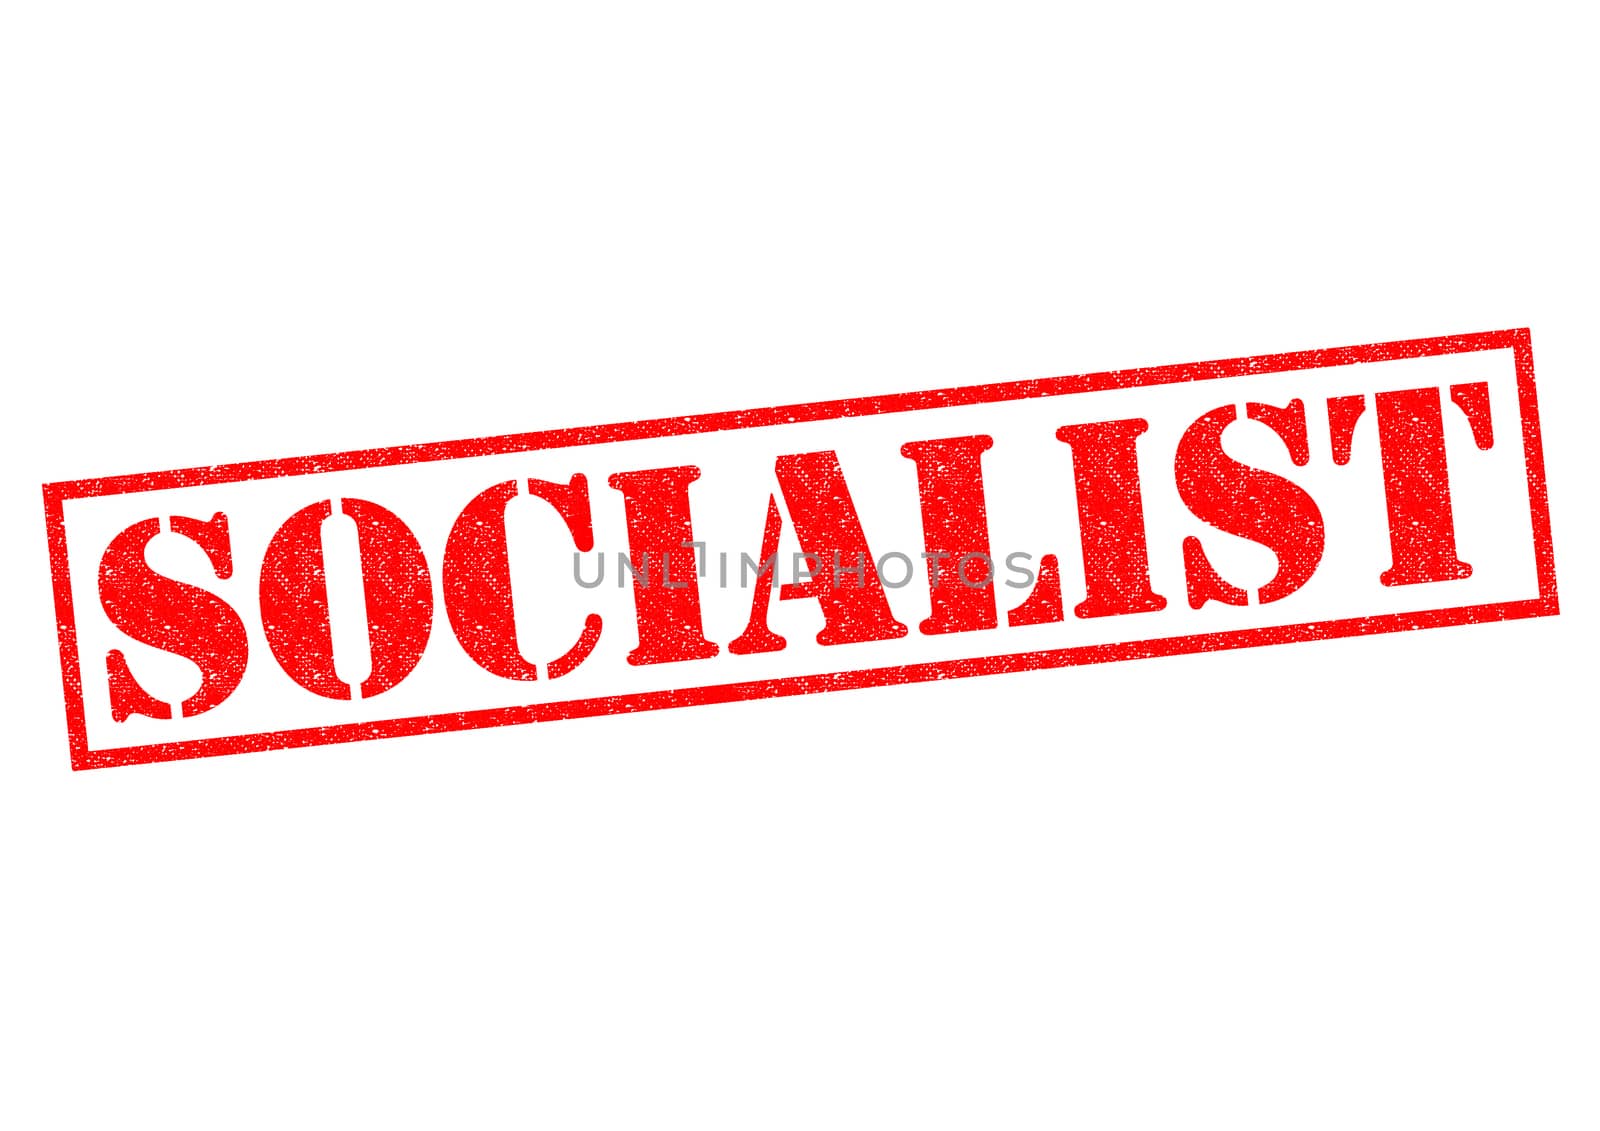 SOCIALIST red Rubber Stamp over a white background.